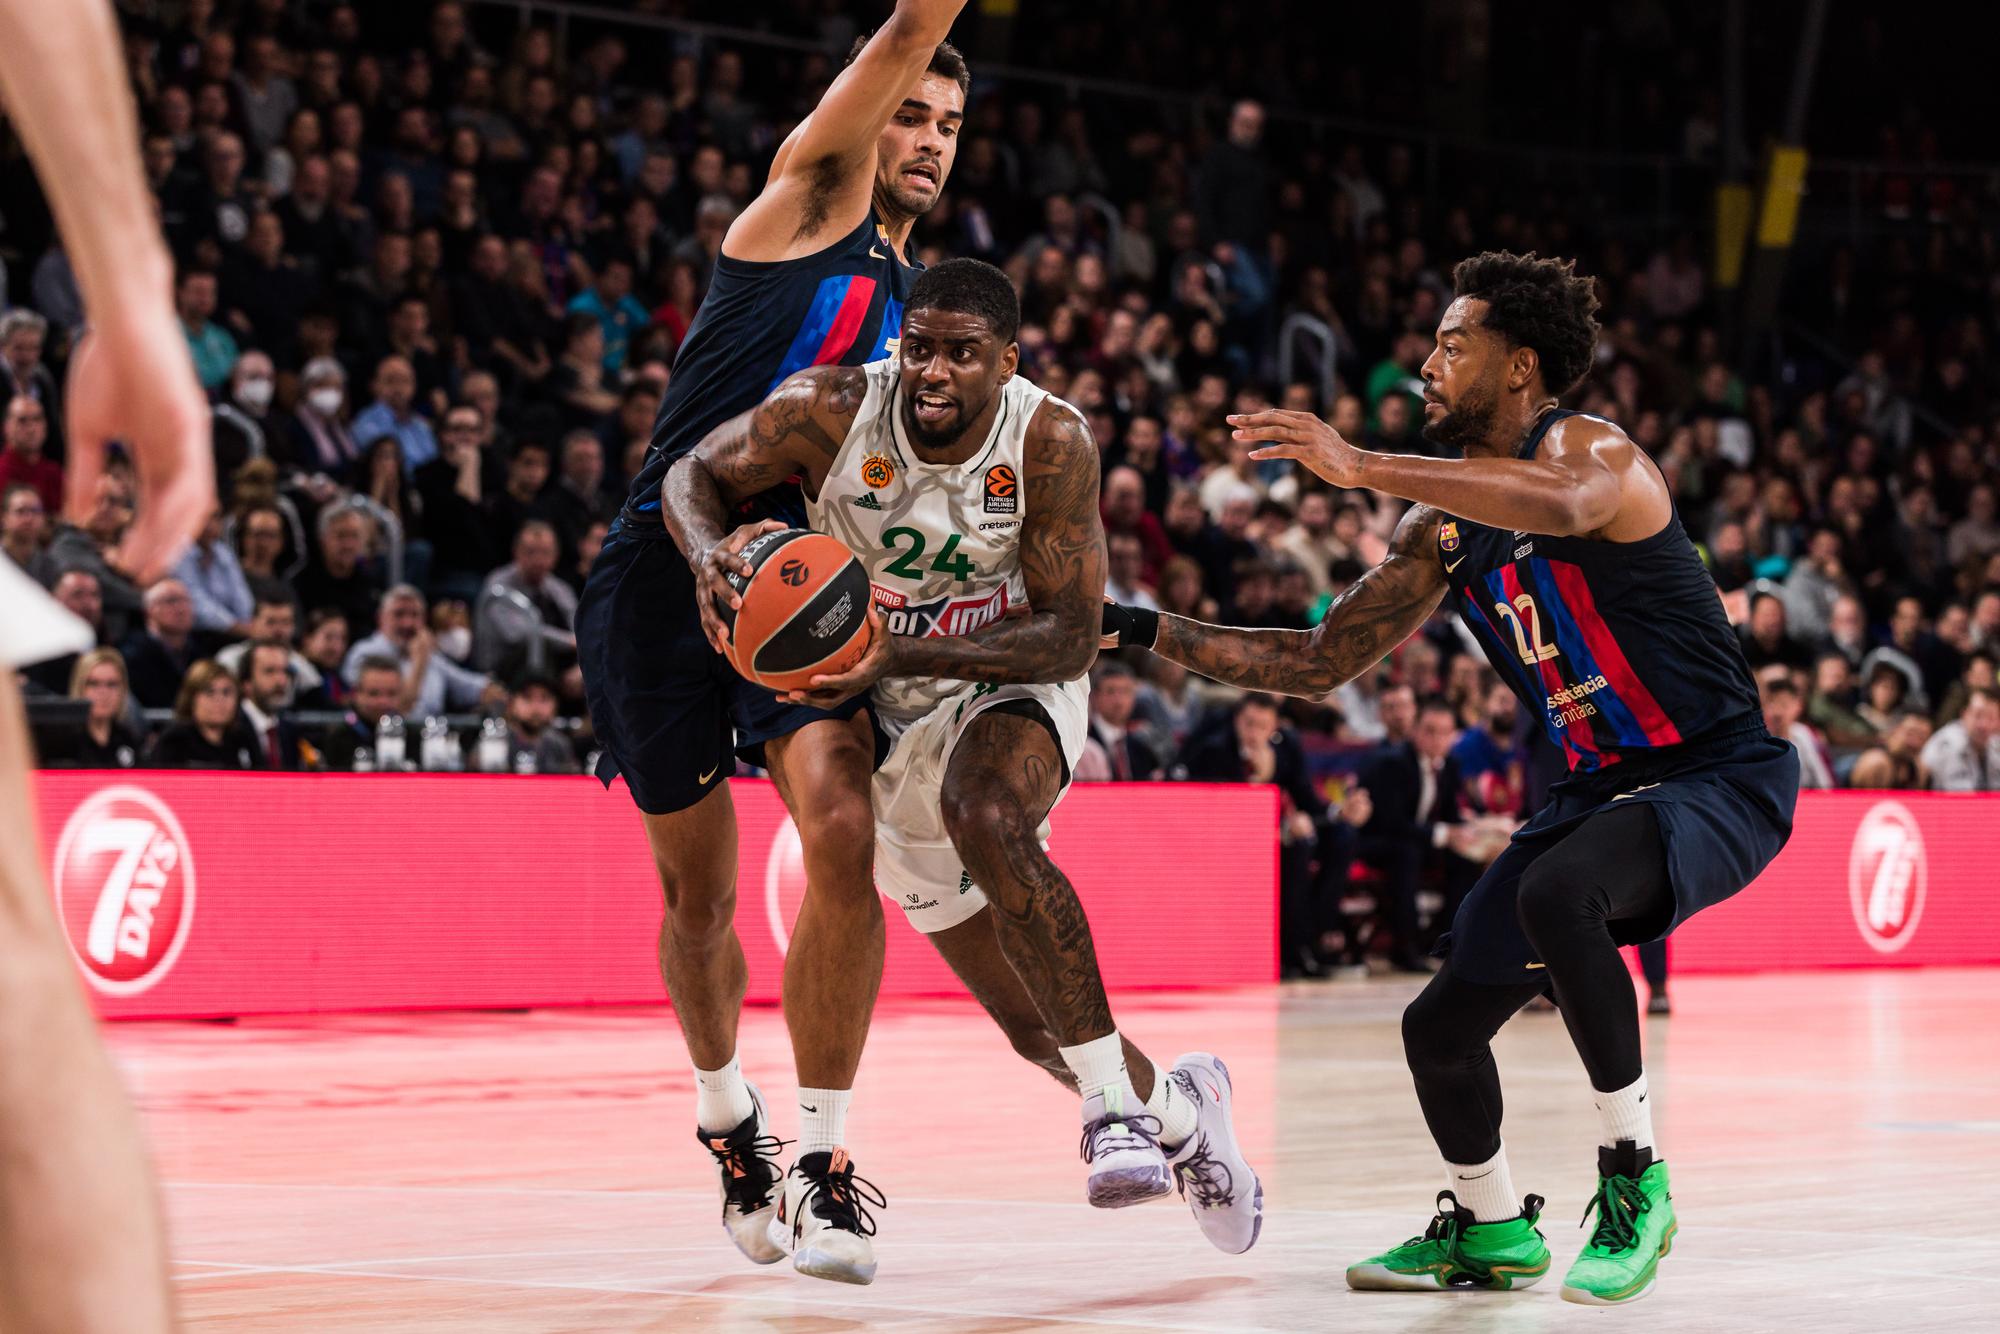 Dwayne Bacon of Panathinaikos Athens in action during the Turkish Airlines EuroLeague match between FC Barcelona and Panathinaikos Athens  at Palau Blaugrana on December 16, 2022 in Barcelona, Spain.